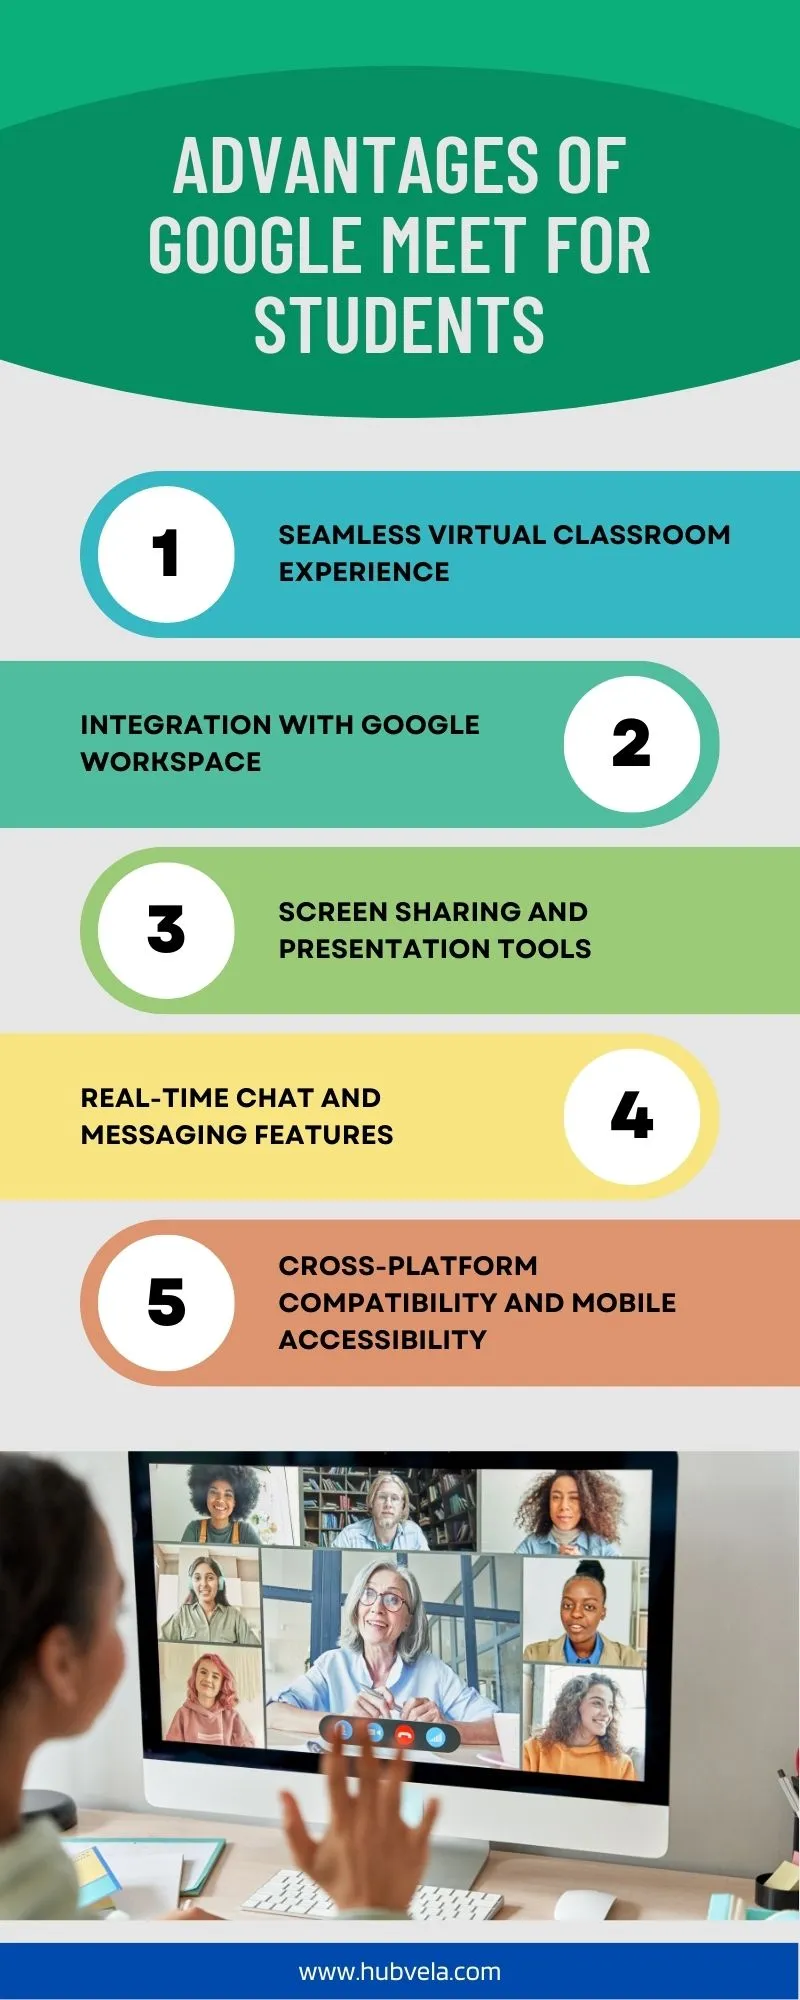 Advantages of Google Meet for Students Infographic